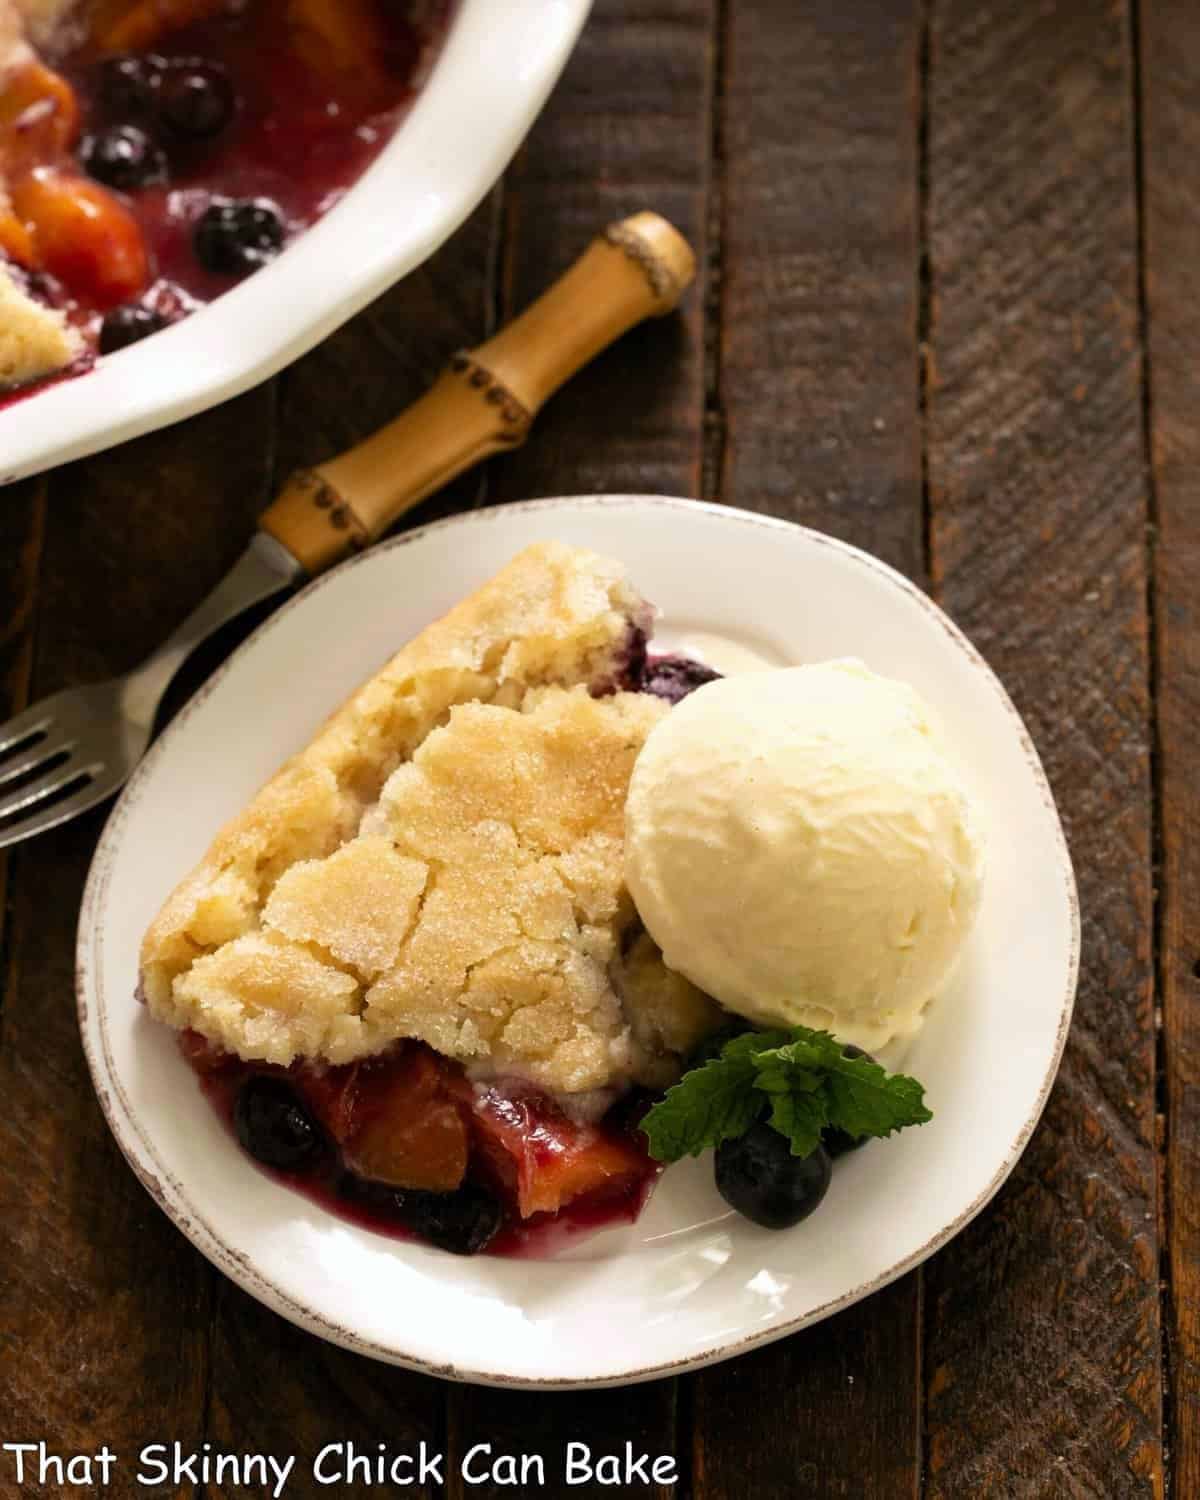 Serving of fruit cobbler with ice cream on a white plate with a fork.